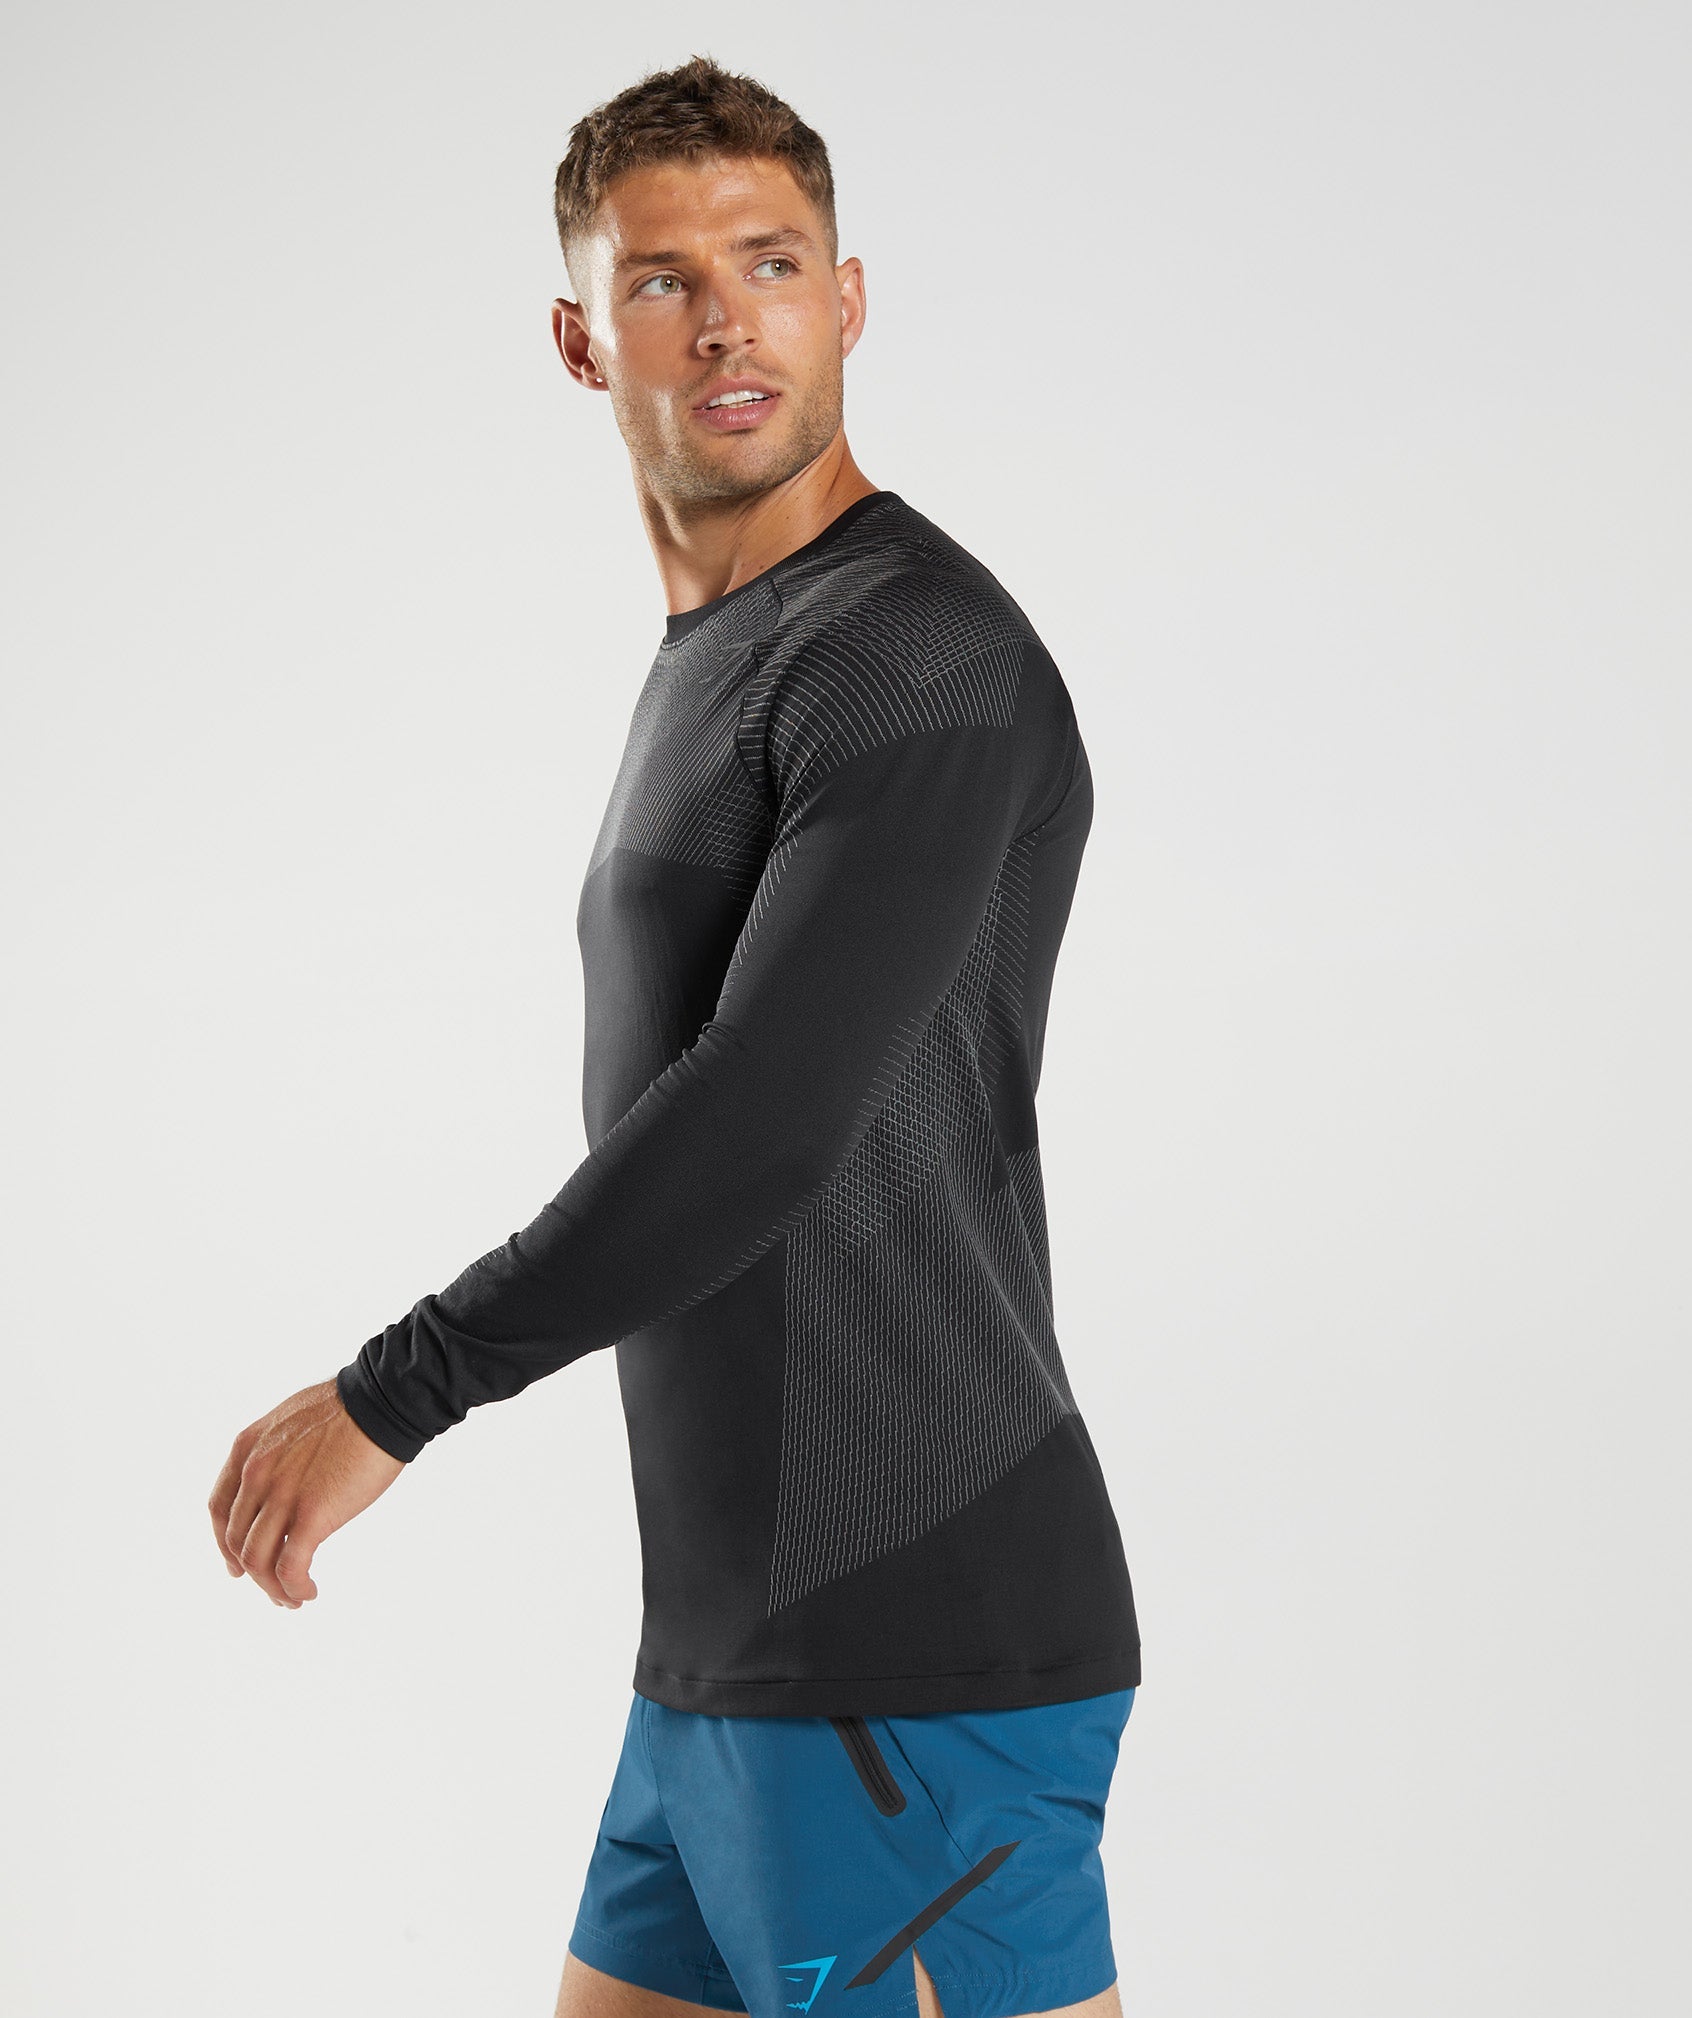 Apex Seamless Long Sleeve T-Shirt in Black/Silhouette Grey